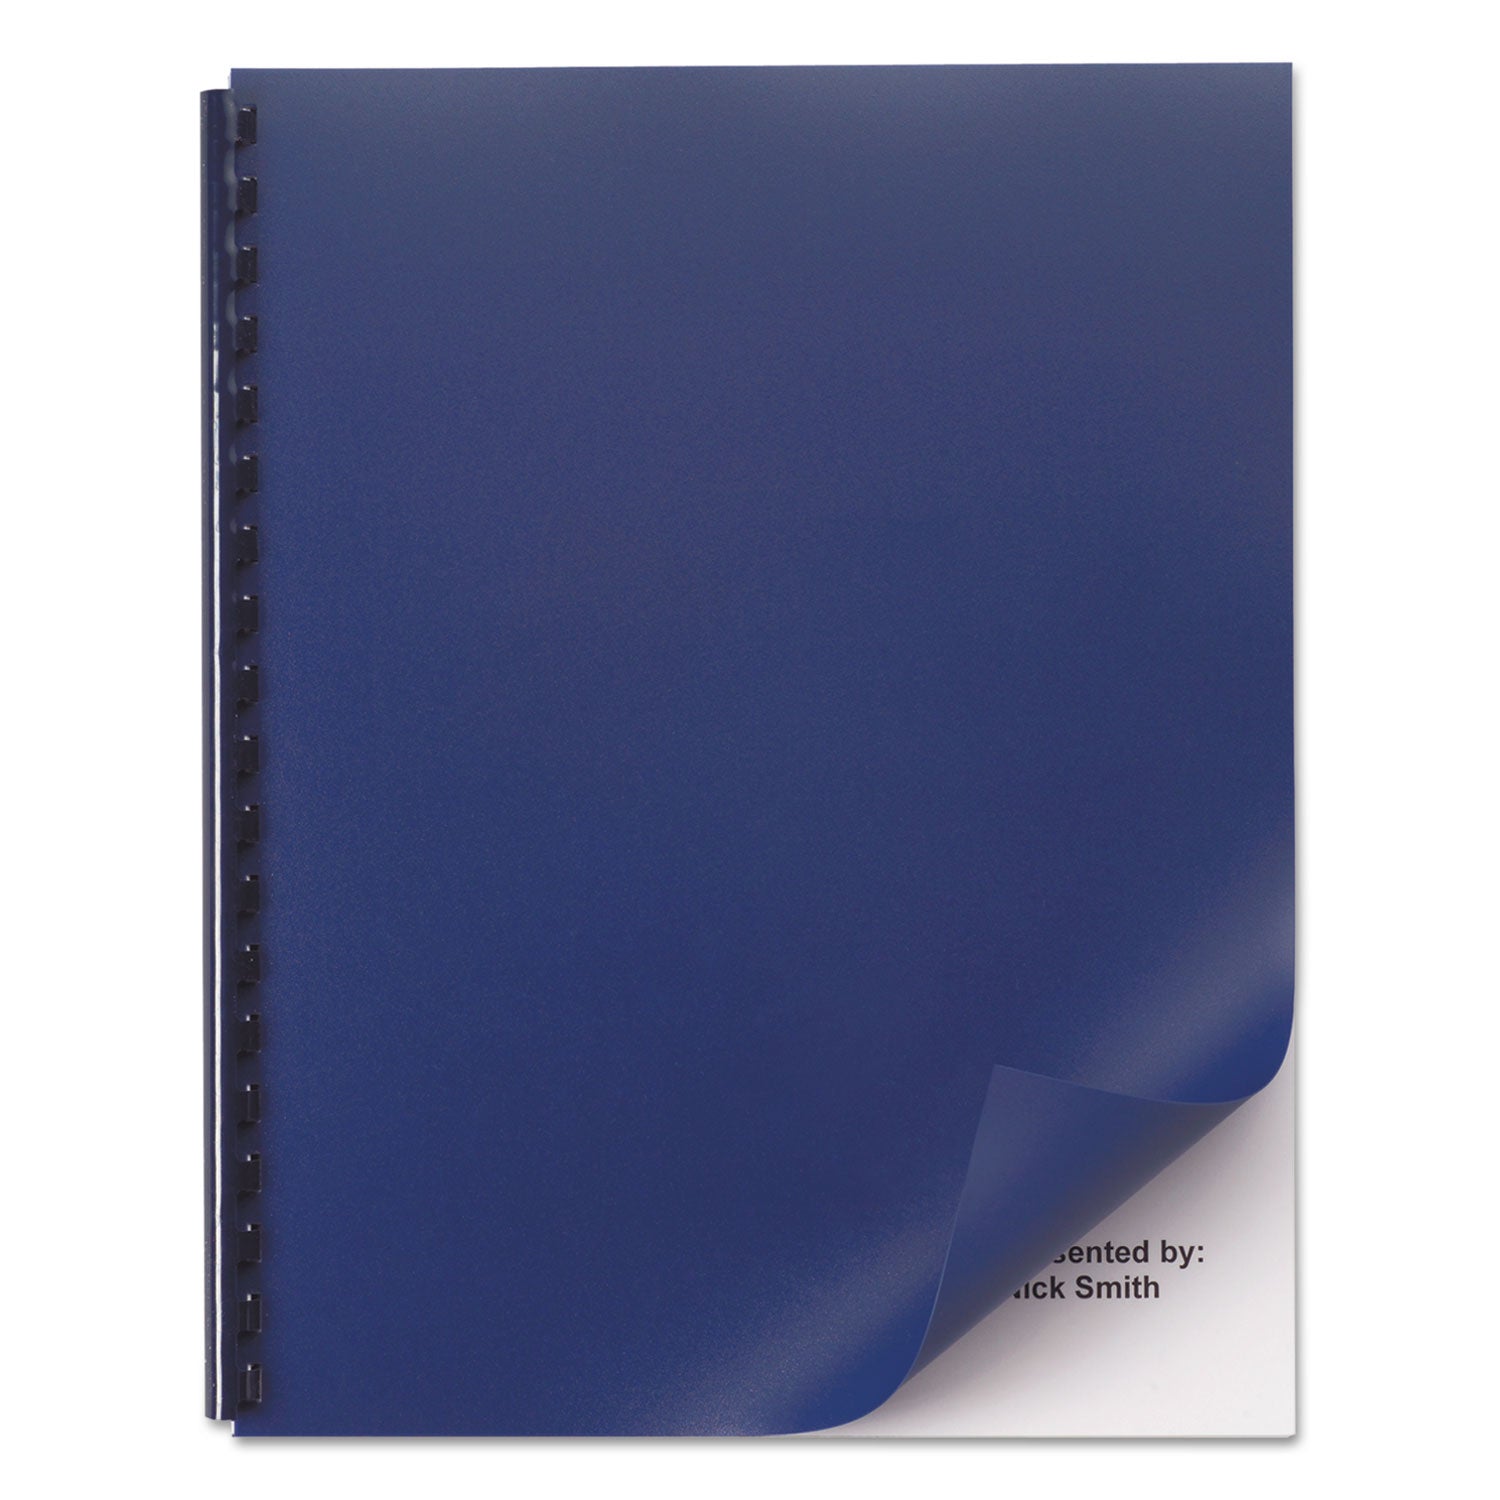 opaque-plastic-presentation-covers-for-binding-systems-navy-11-x-85-unpunched-50-pack_gbc2514494 - 1